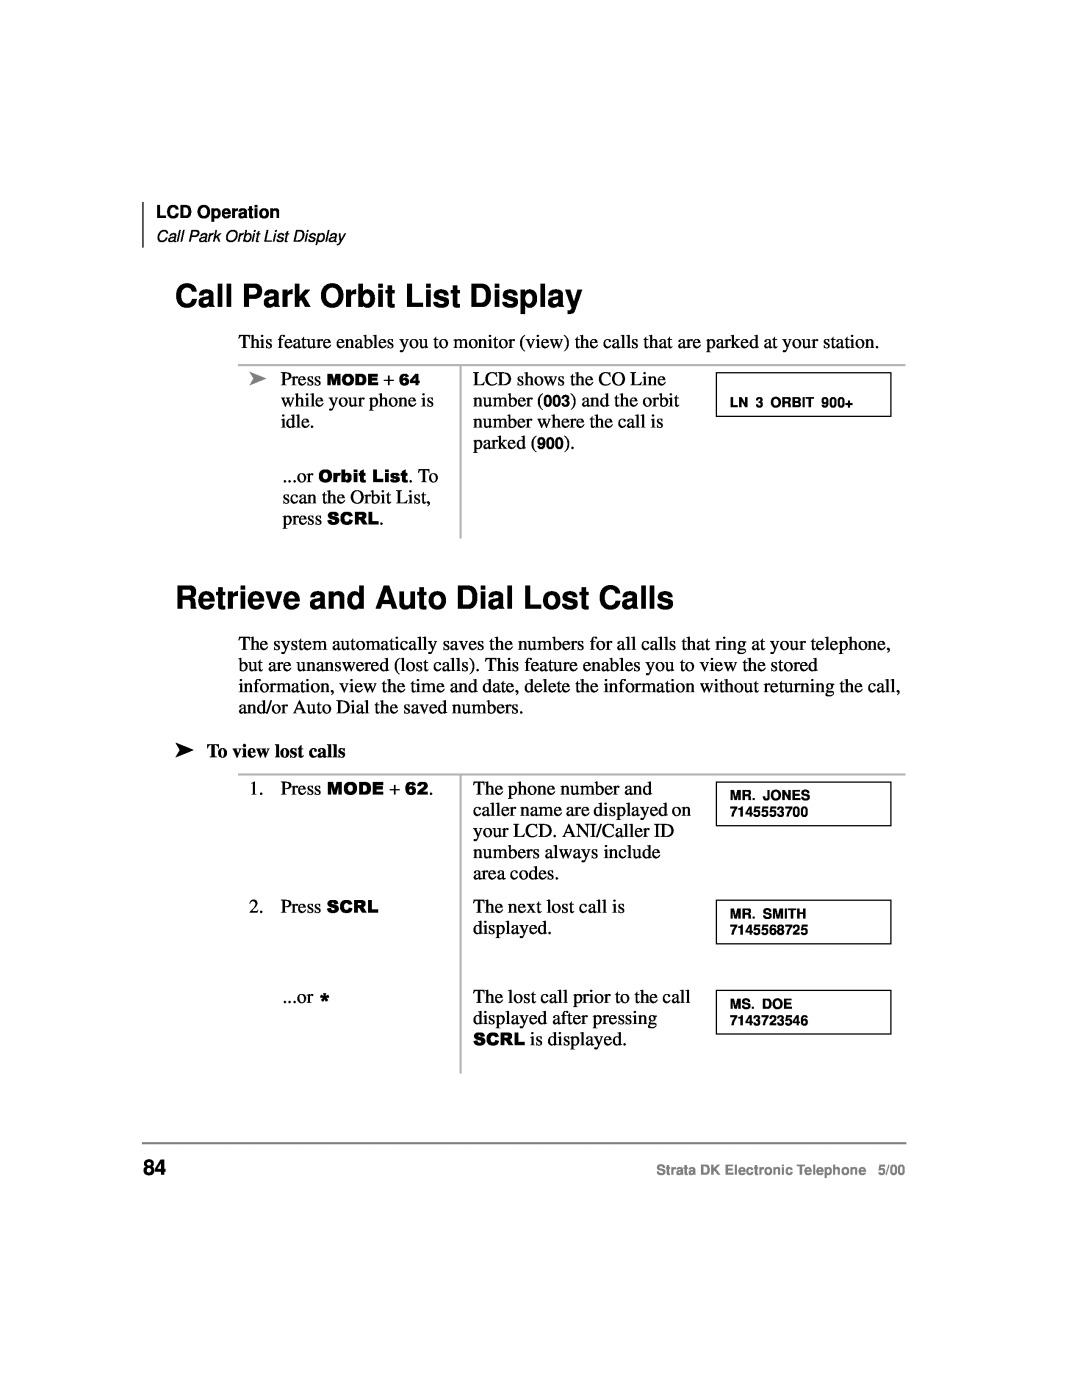 Toshiba Strata DK manual Call Park Orbit List Display, Retrieve and Auto Dial Lost Calls, To view lost calls 